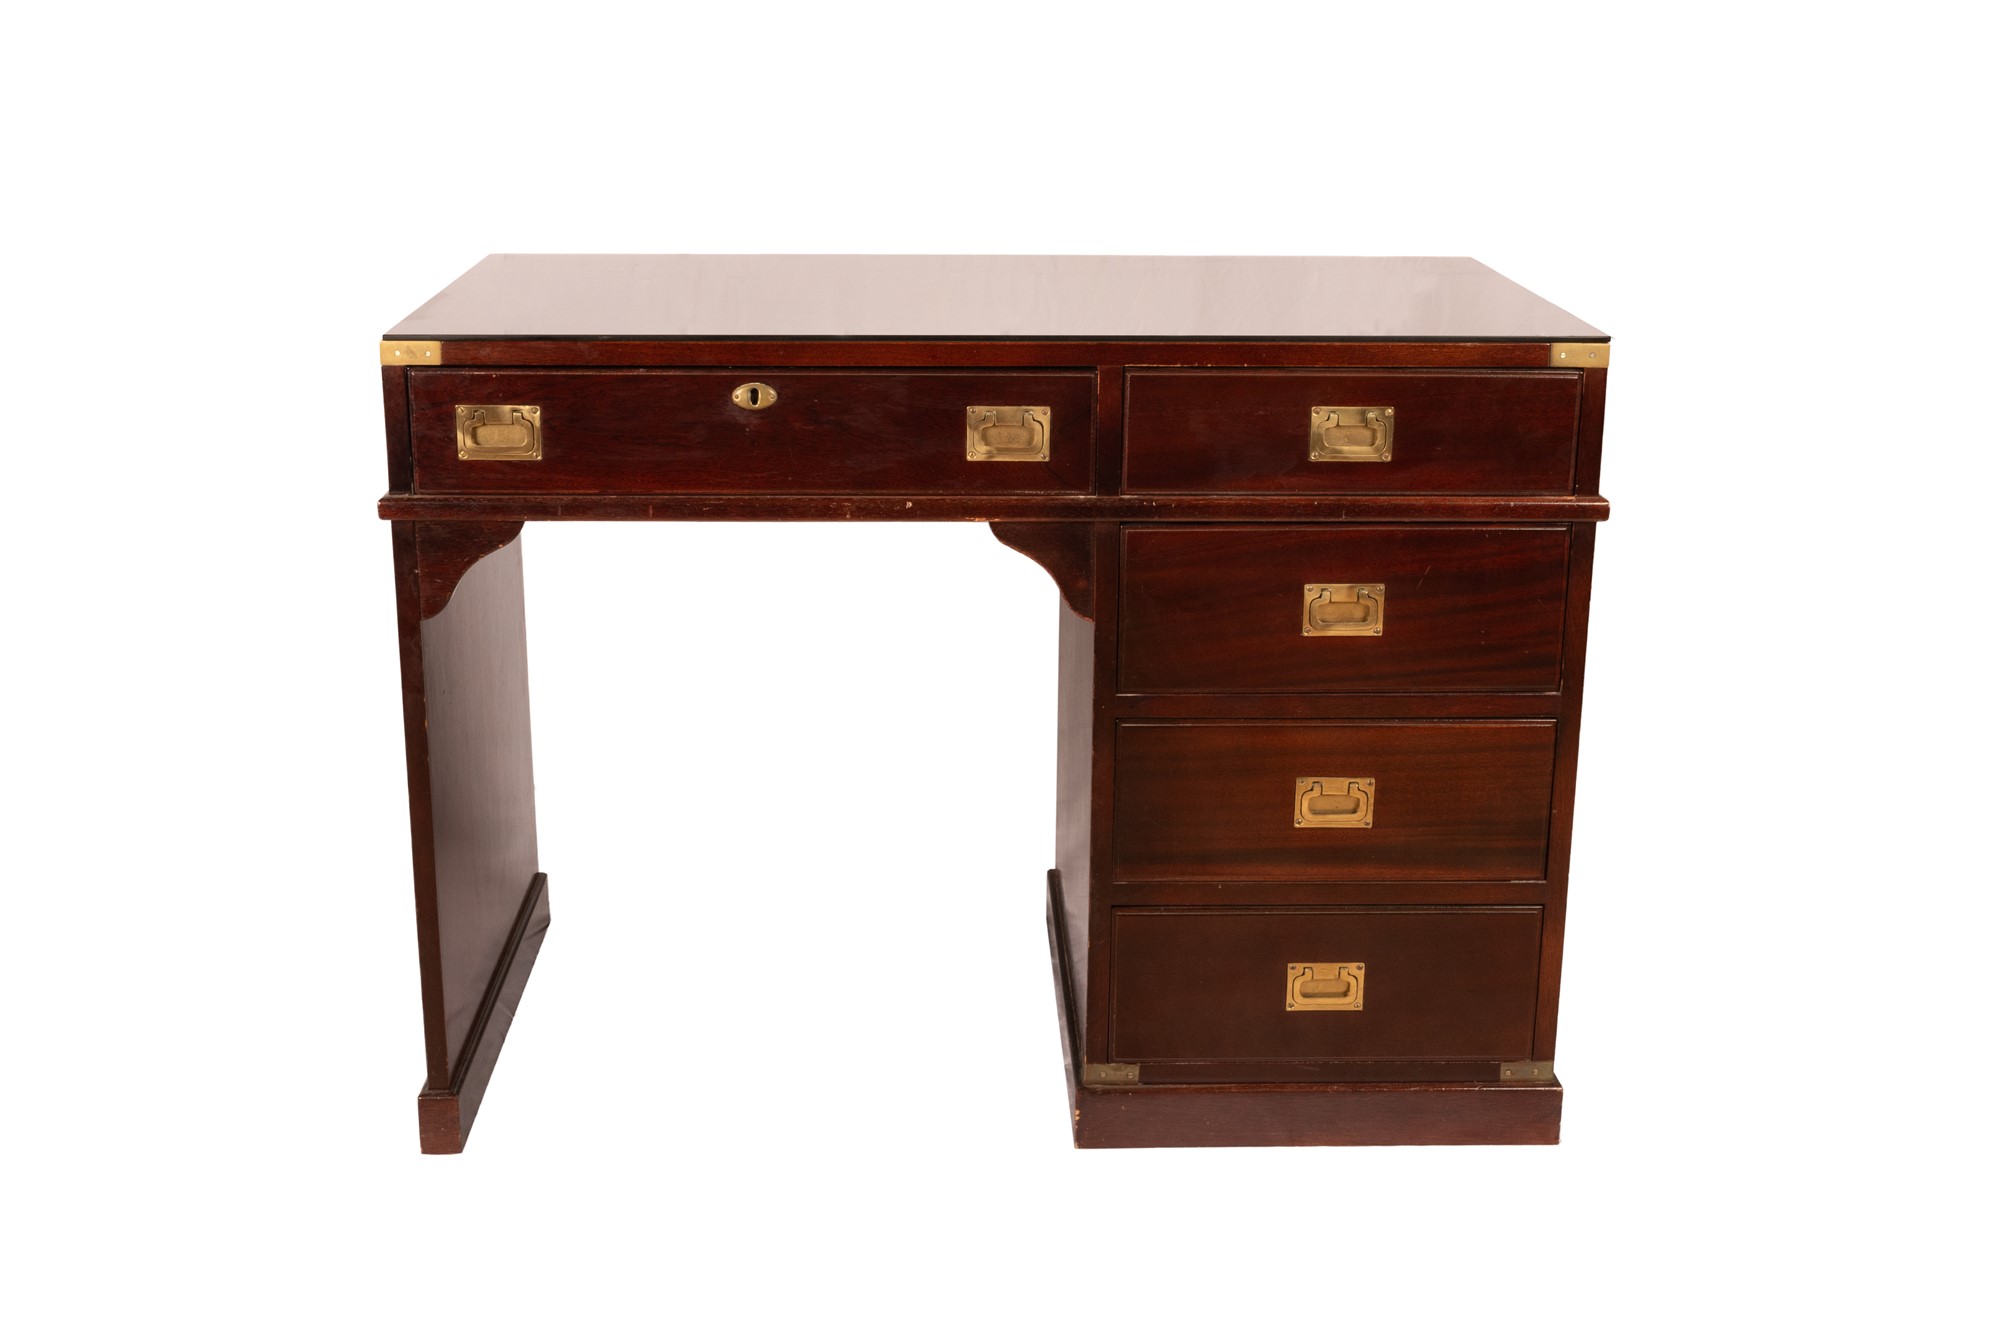 Byron marine style mahogany desk with five drawers on the front and glass top - Image 2 of 19